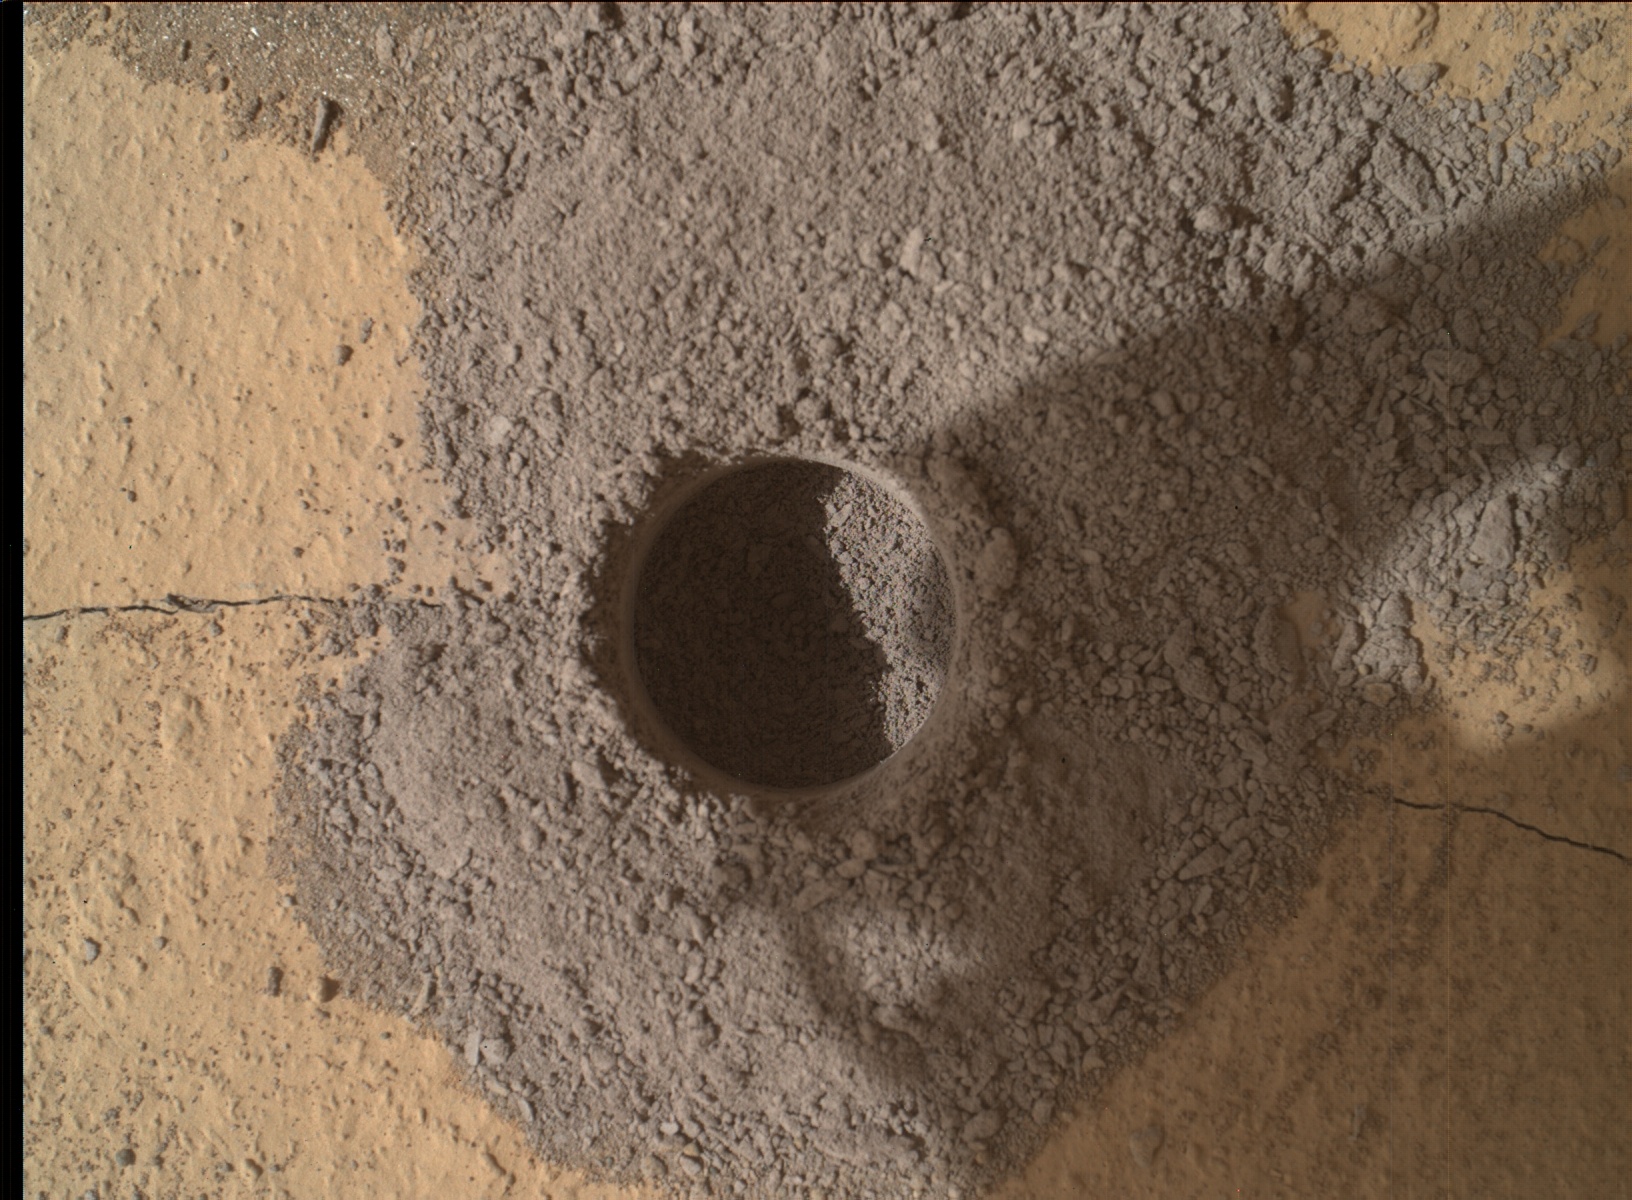 Nasa's Mars rover Curiosity acquired this image using its Mars Hand Lens Imager (MAHLI) on Sol 756